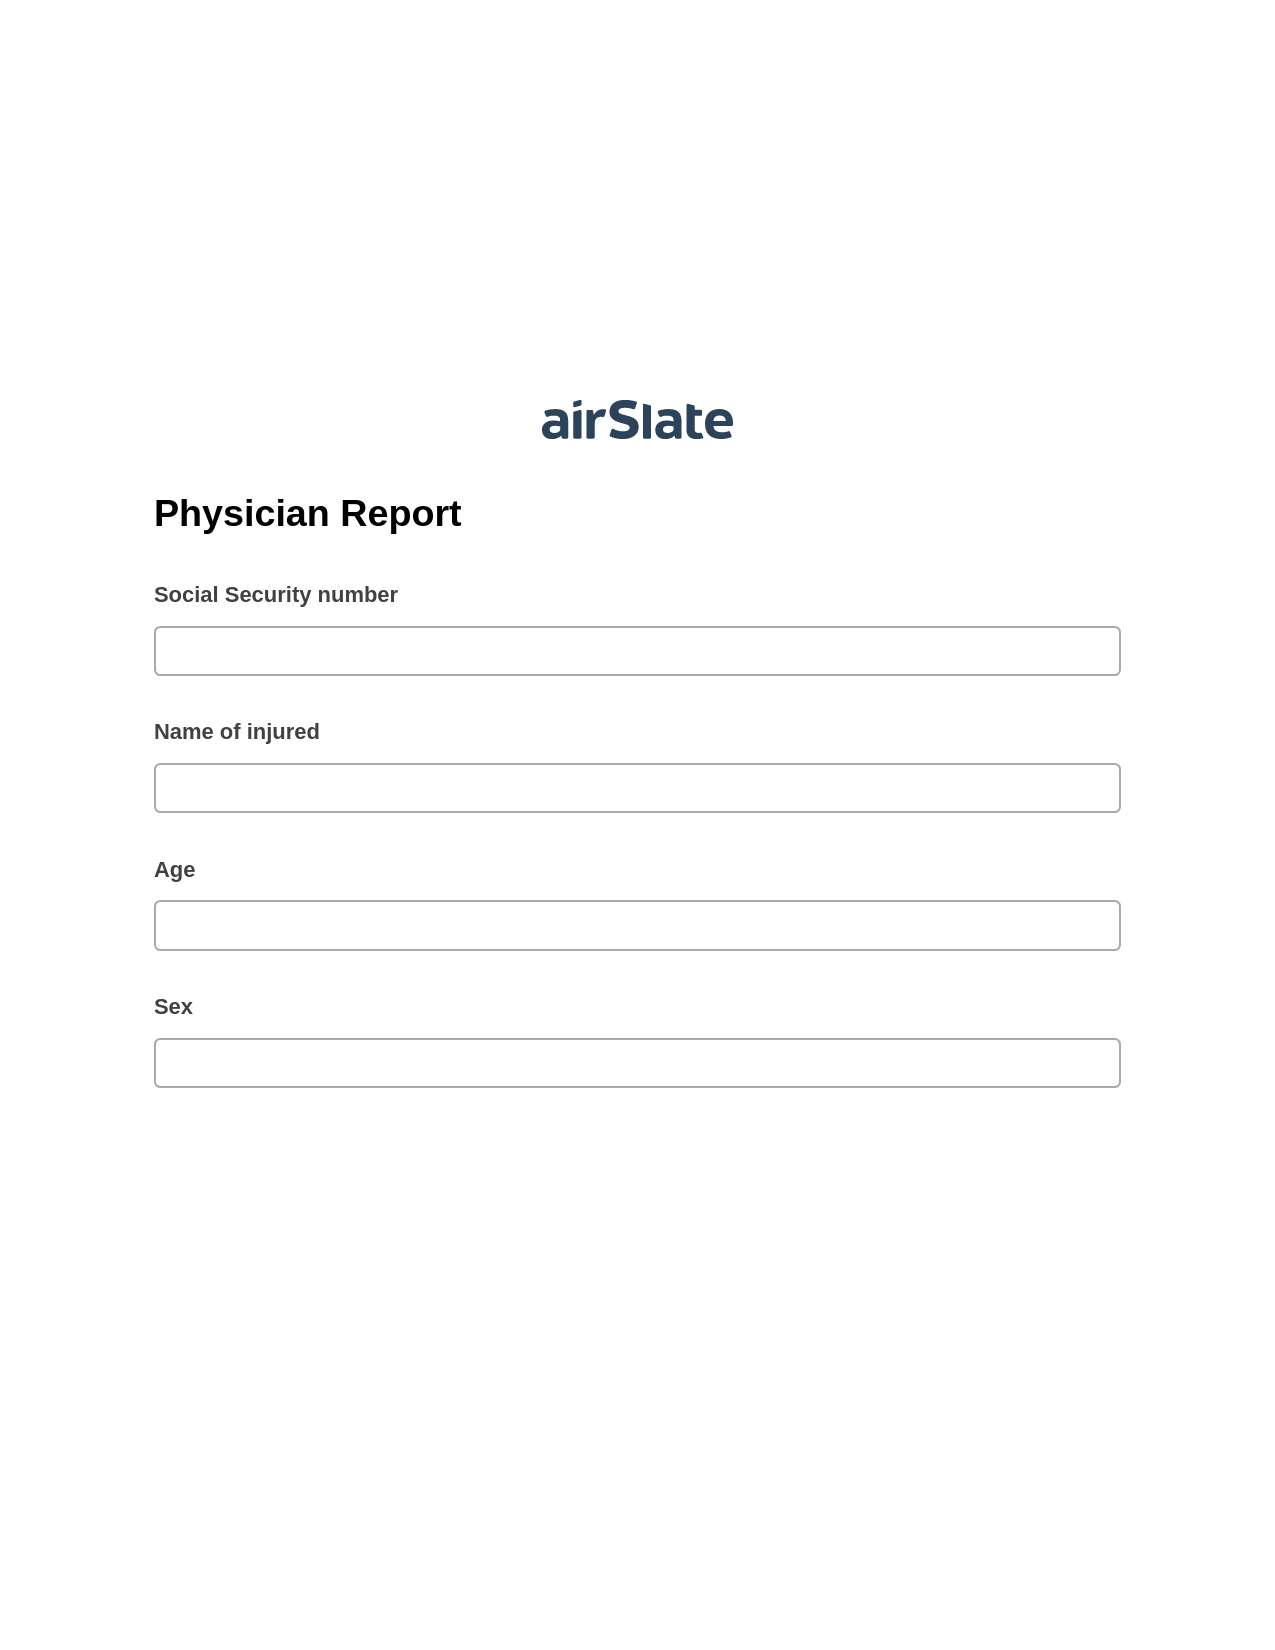 Multirole Physician Report Pre-fill from Excel Spreadsheet Bot, Create MS Dynamics 365 Records Bot, Export to Excel 365 Bot